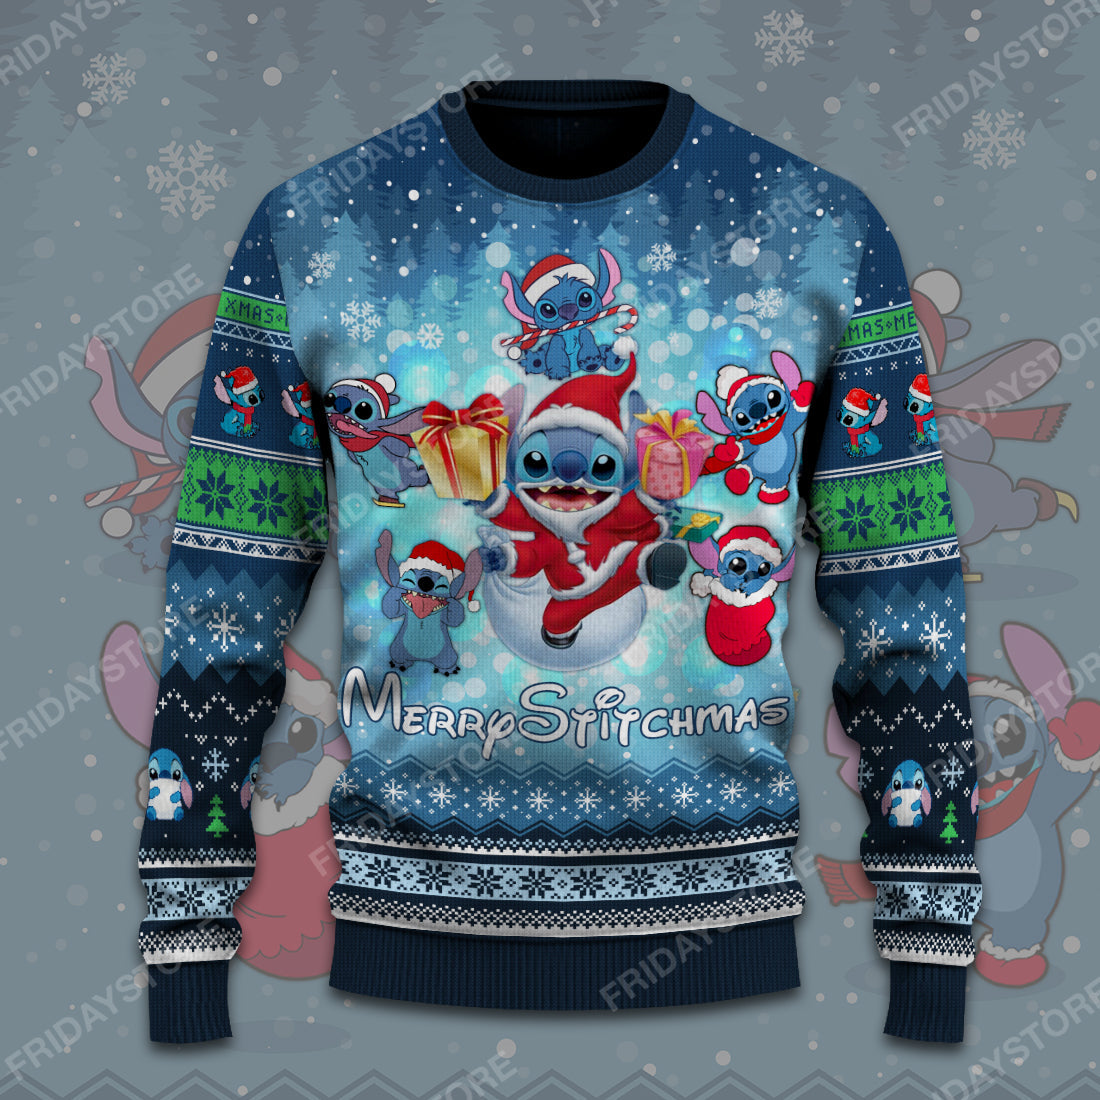 Unifinz LAS Sweater Merry Stitchmas Christmas Pattern Ugly Sweater Cute High Quality DN Stitch Ugly Sweater 2024